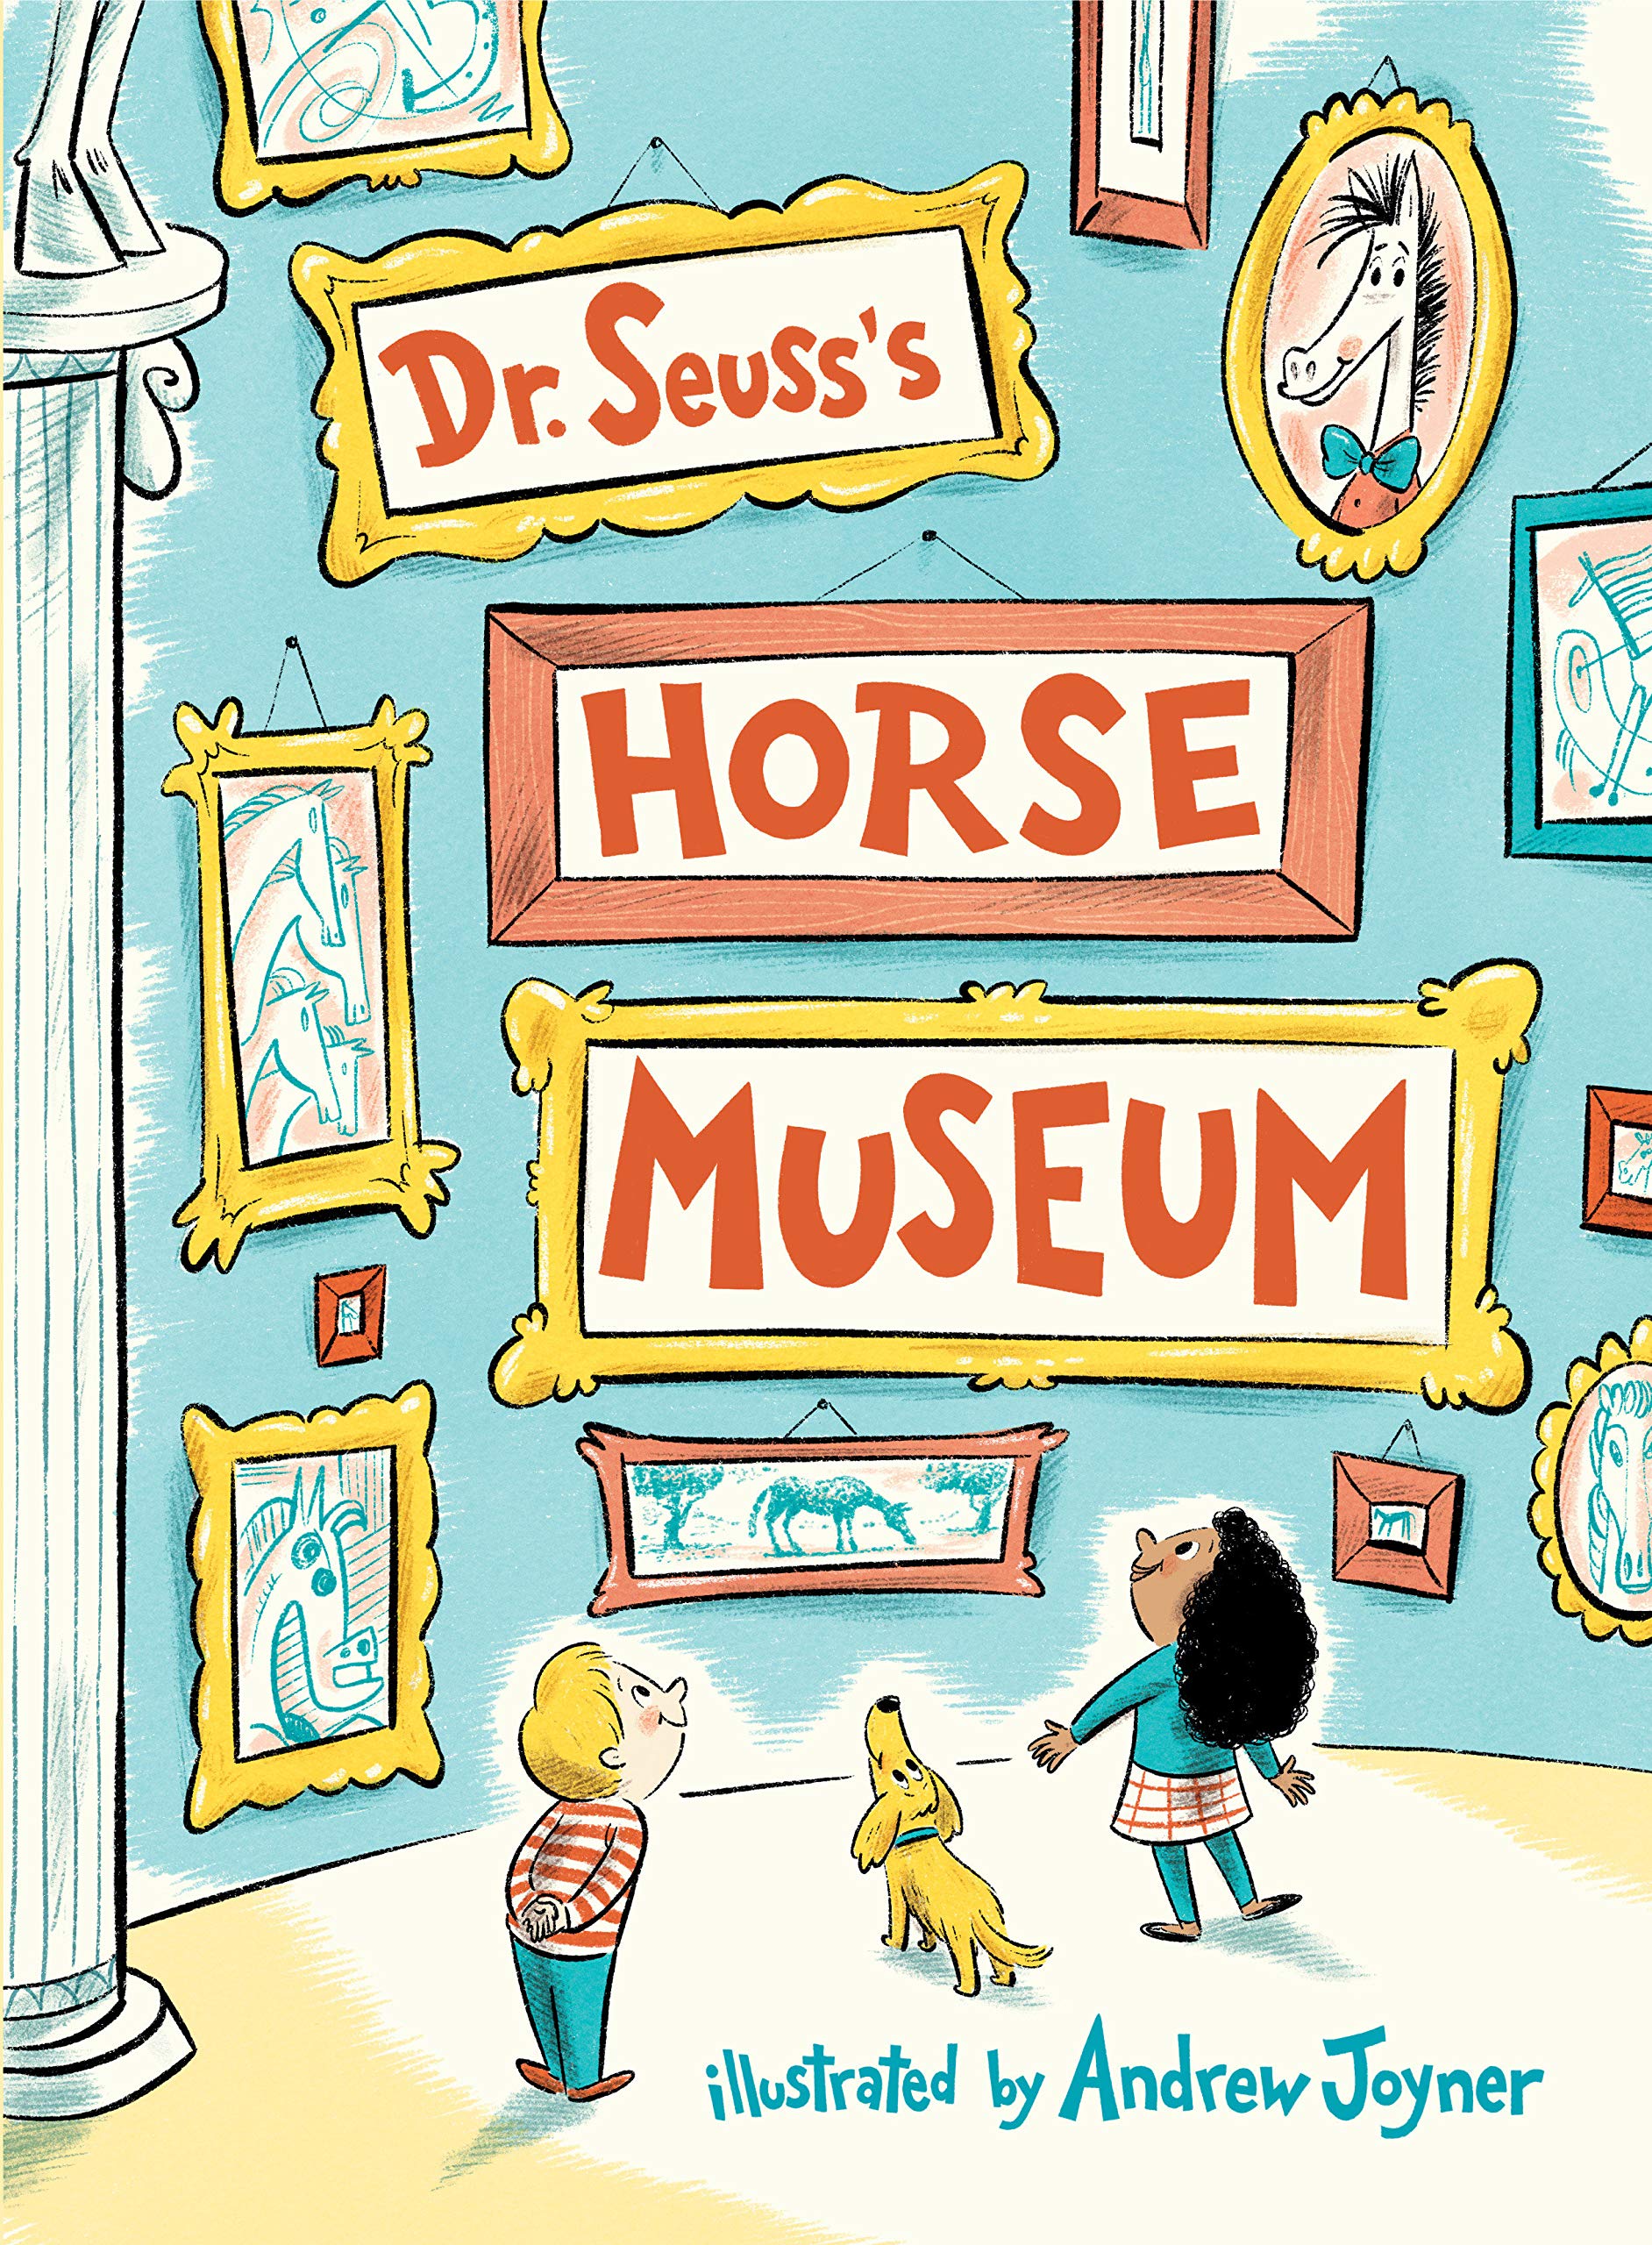 Sunday Story Time: Dr. Seuss's Horse Museum